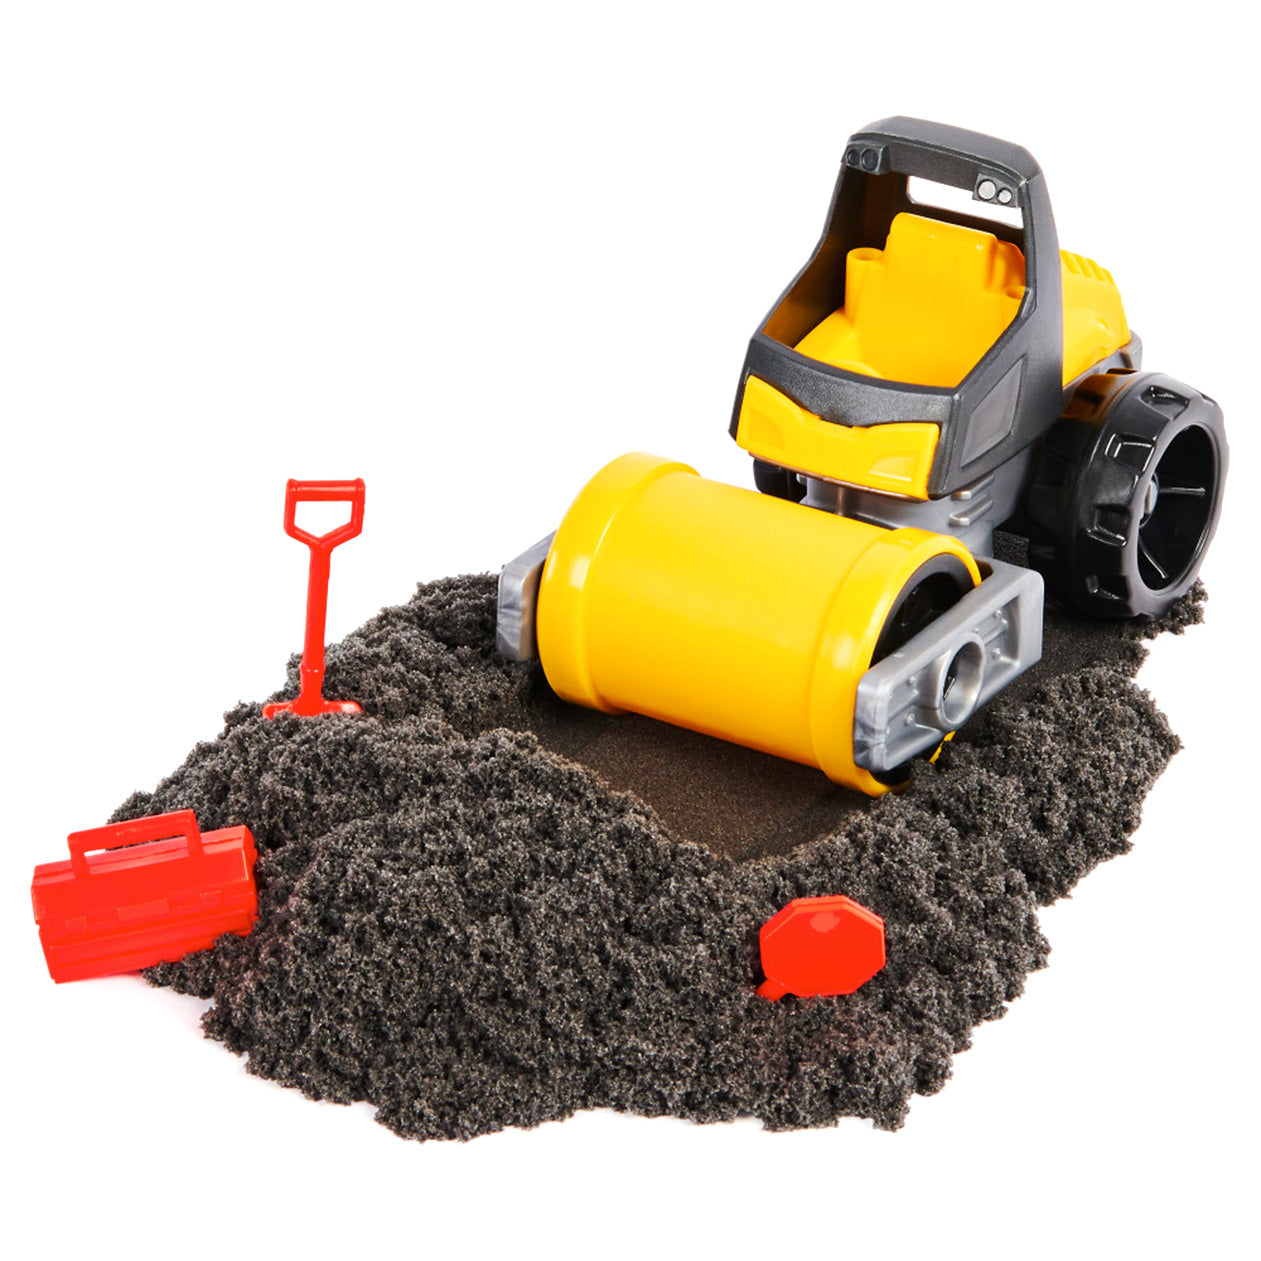 Pave and Play Construction Playset